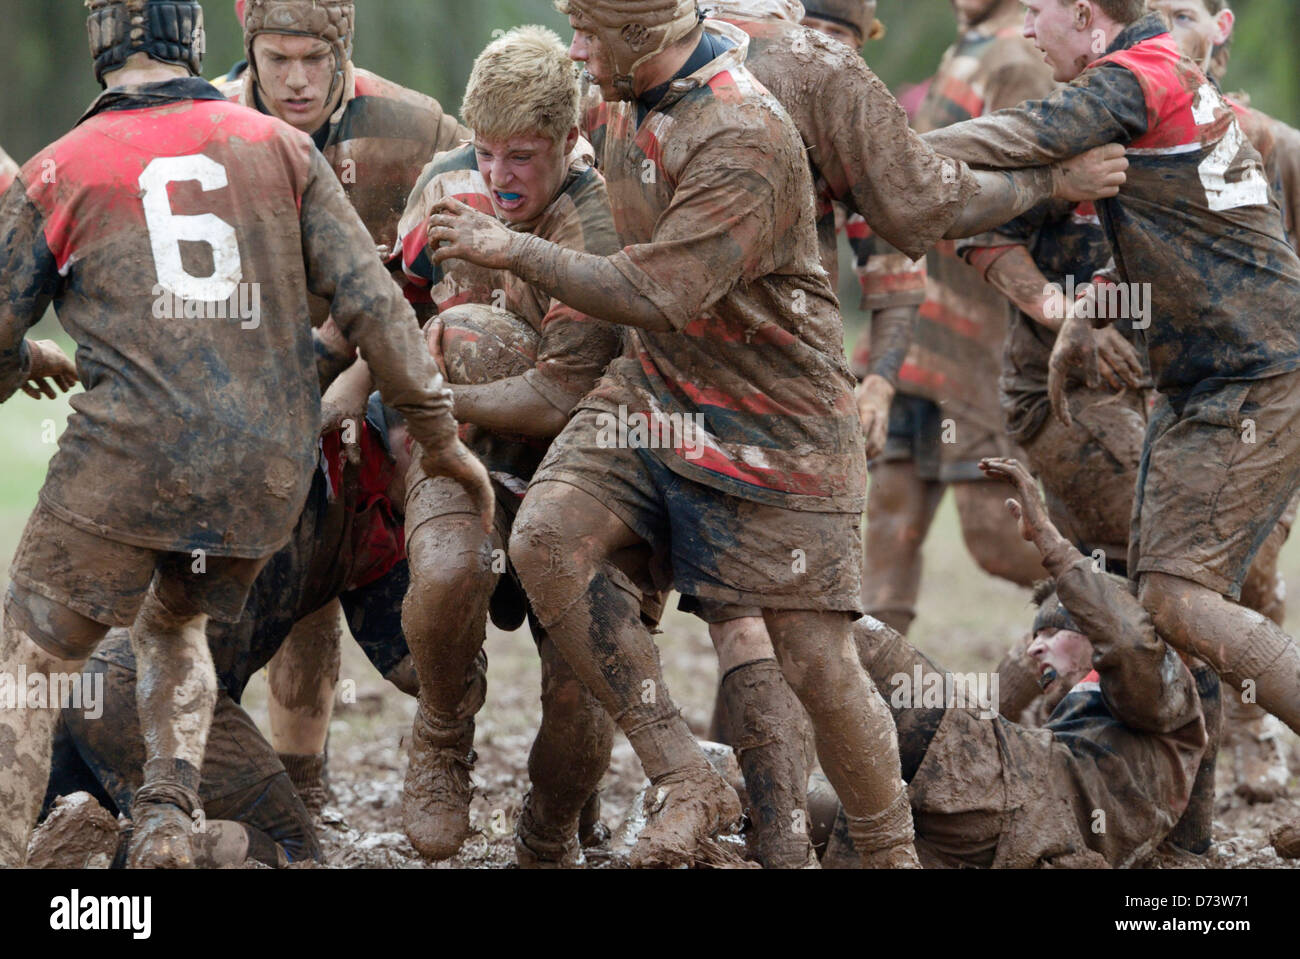 Teams battle in the mud during a game at the annual Cherry Blossom Rugby Tournament. Stock Photo